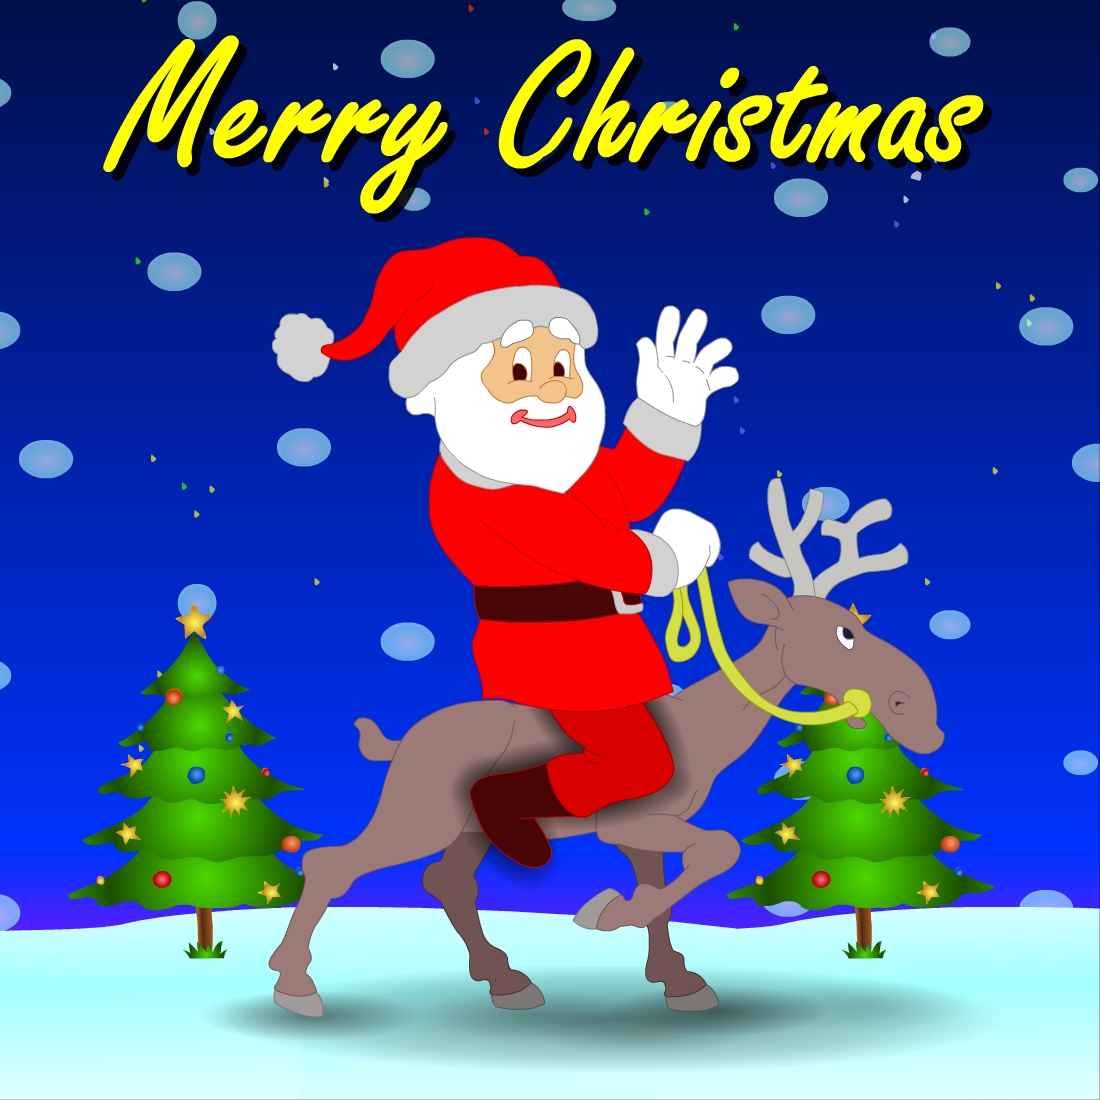 Merry Christmas Santa on the Deer Illustrations preview image.